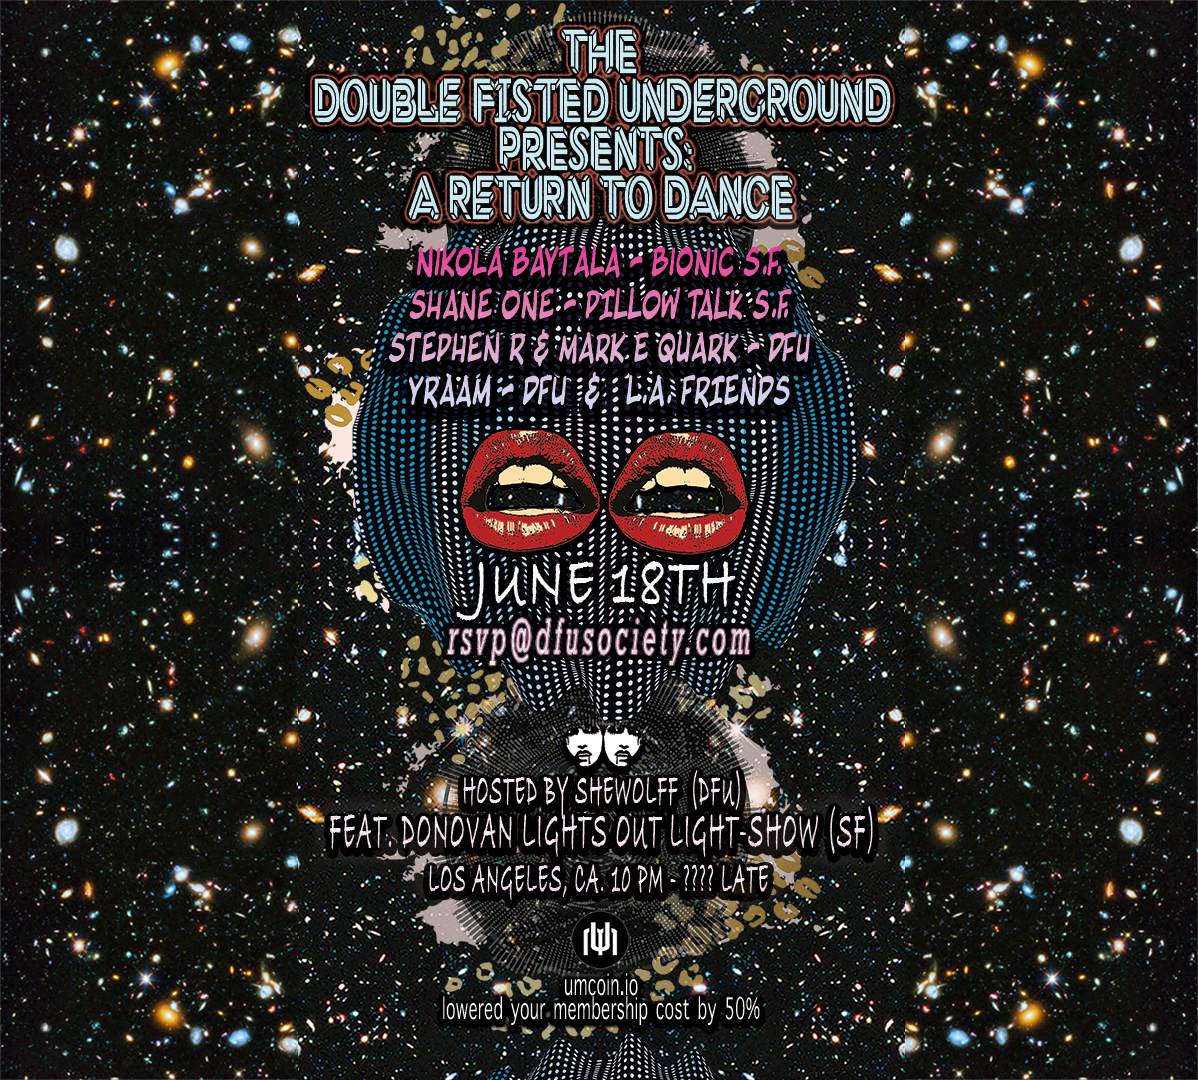 The Double Fisted Underground PRESENTS: A RETURN TO DANCE - Página frontal